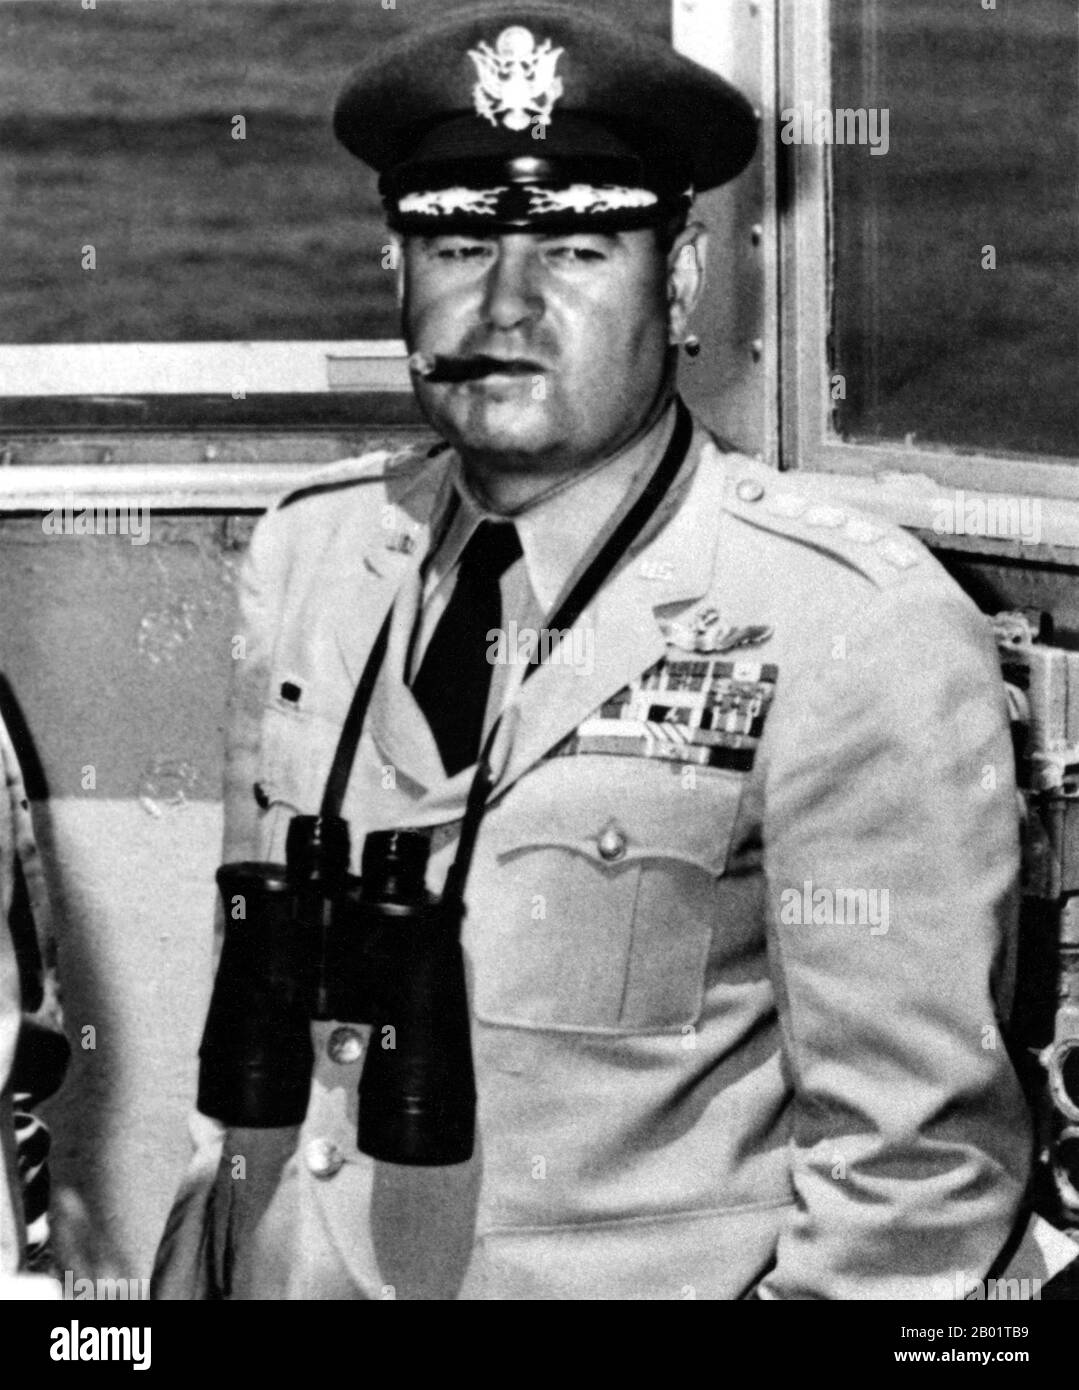 USA: General Curtis Emerson LeMay (15 November 1906 - 1 October 1990), c. 1940s.  Curtis Emerson LeMay was a general in the United States Air Force and the vice presidential running mate of American Independent Party presidential candidate George Wallace in 1968.  He is credited with designing and implementing an effective, but also controversial, systematic strategic bombing campaign in the Pacific theater of World War II. During the war, he was known for planning and executing a massive bombing campaign against cities in Japan. After the war, he headed the Berlin airlift. Stock Photo